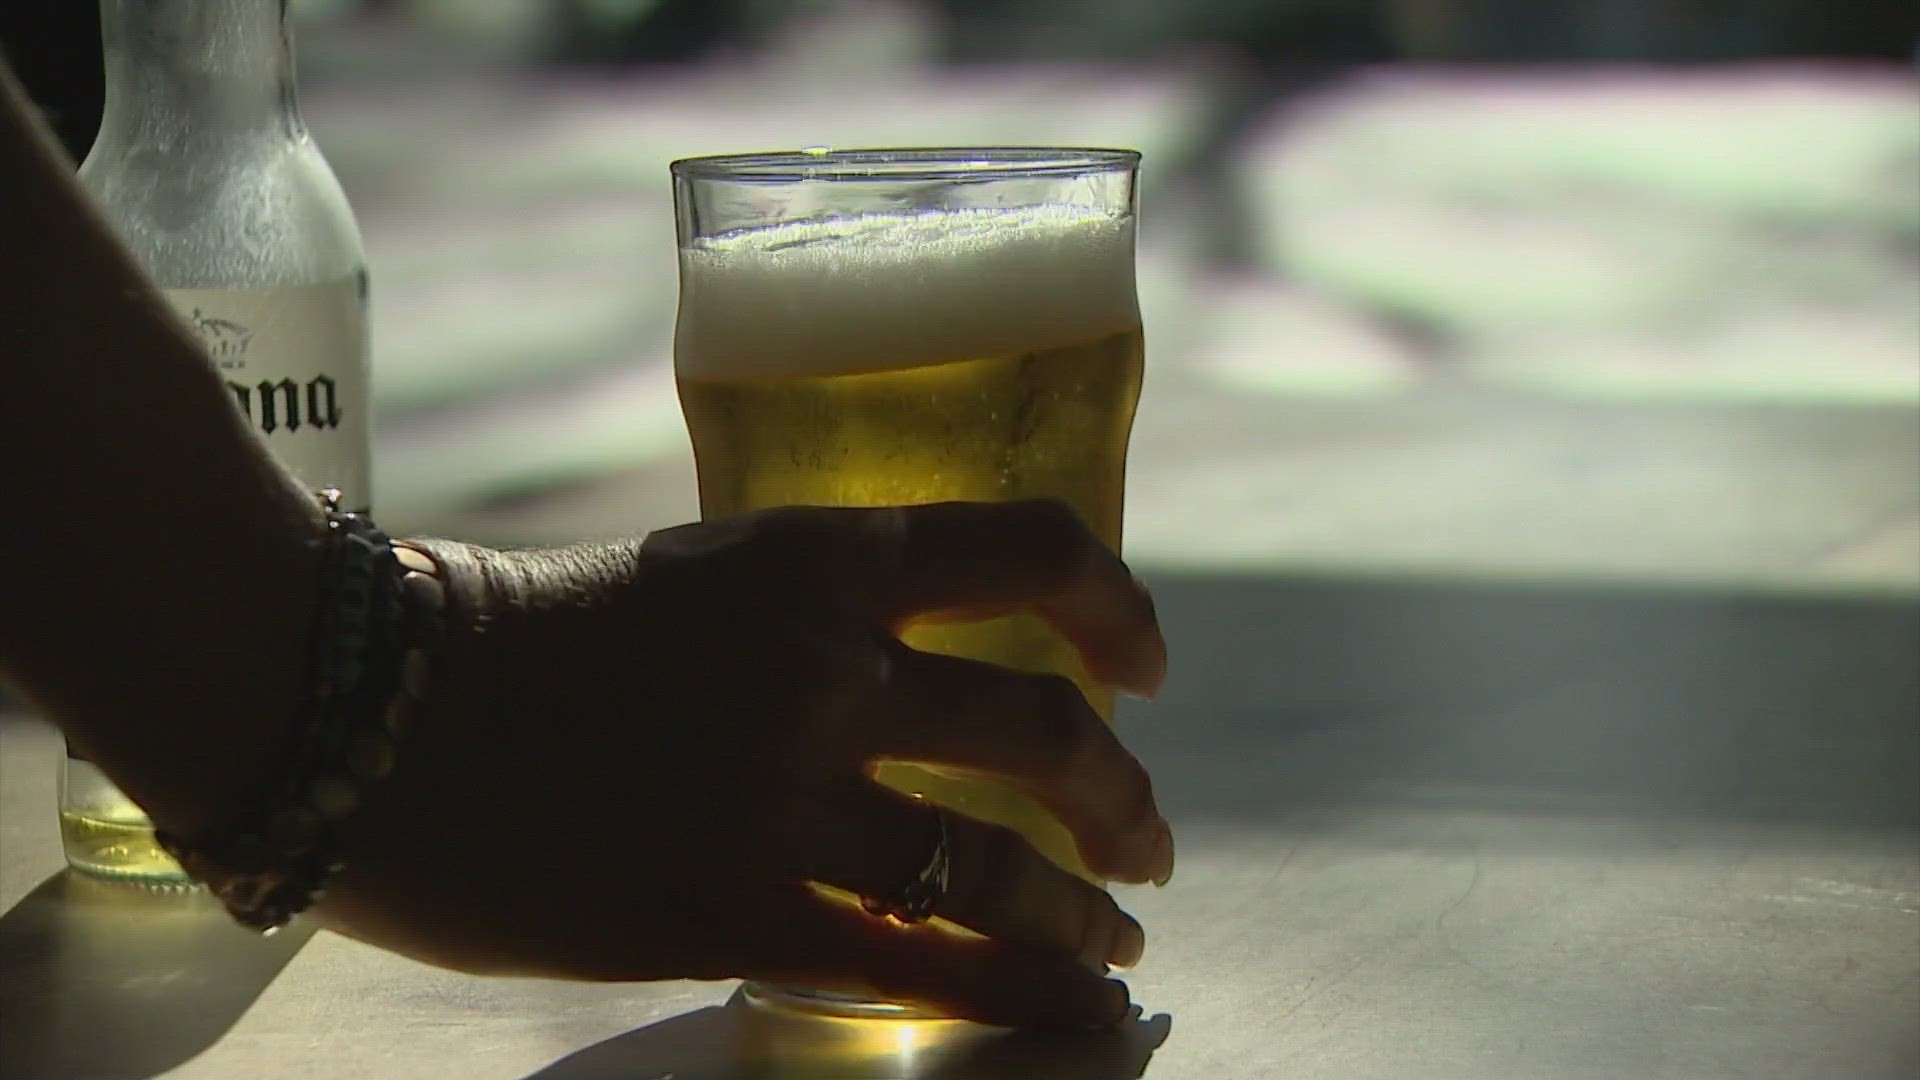 Seattle's mayor is introducing a plan that would allow people to publicly consume alcoholic drinks outdoors at certain Pioneer Square events.